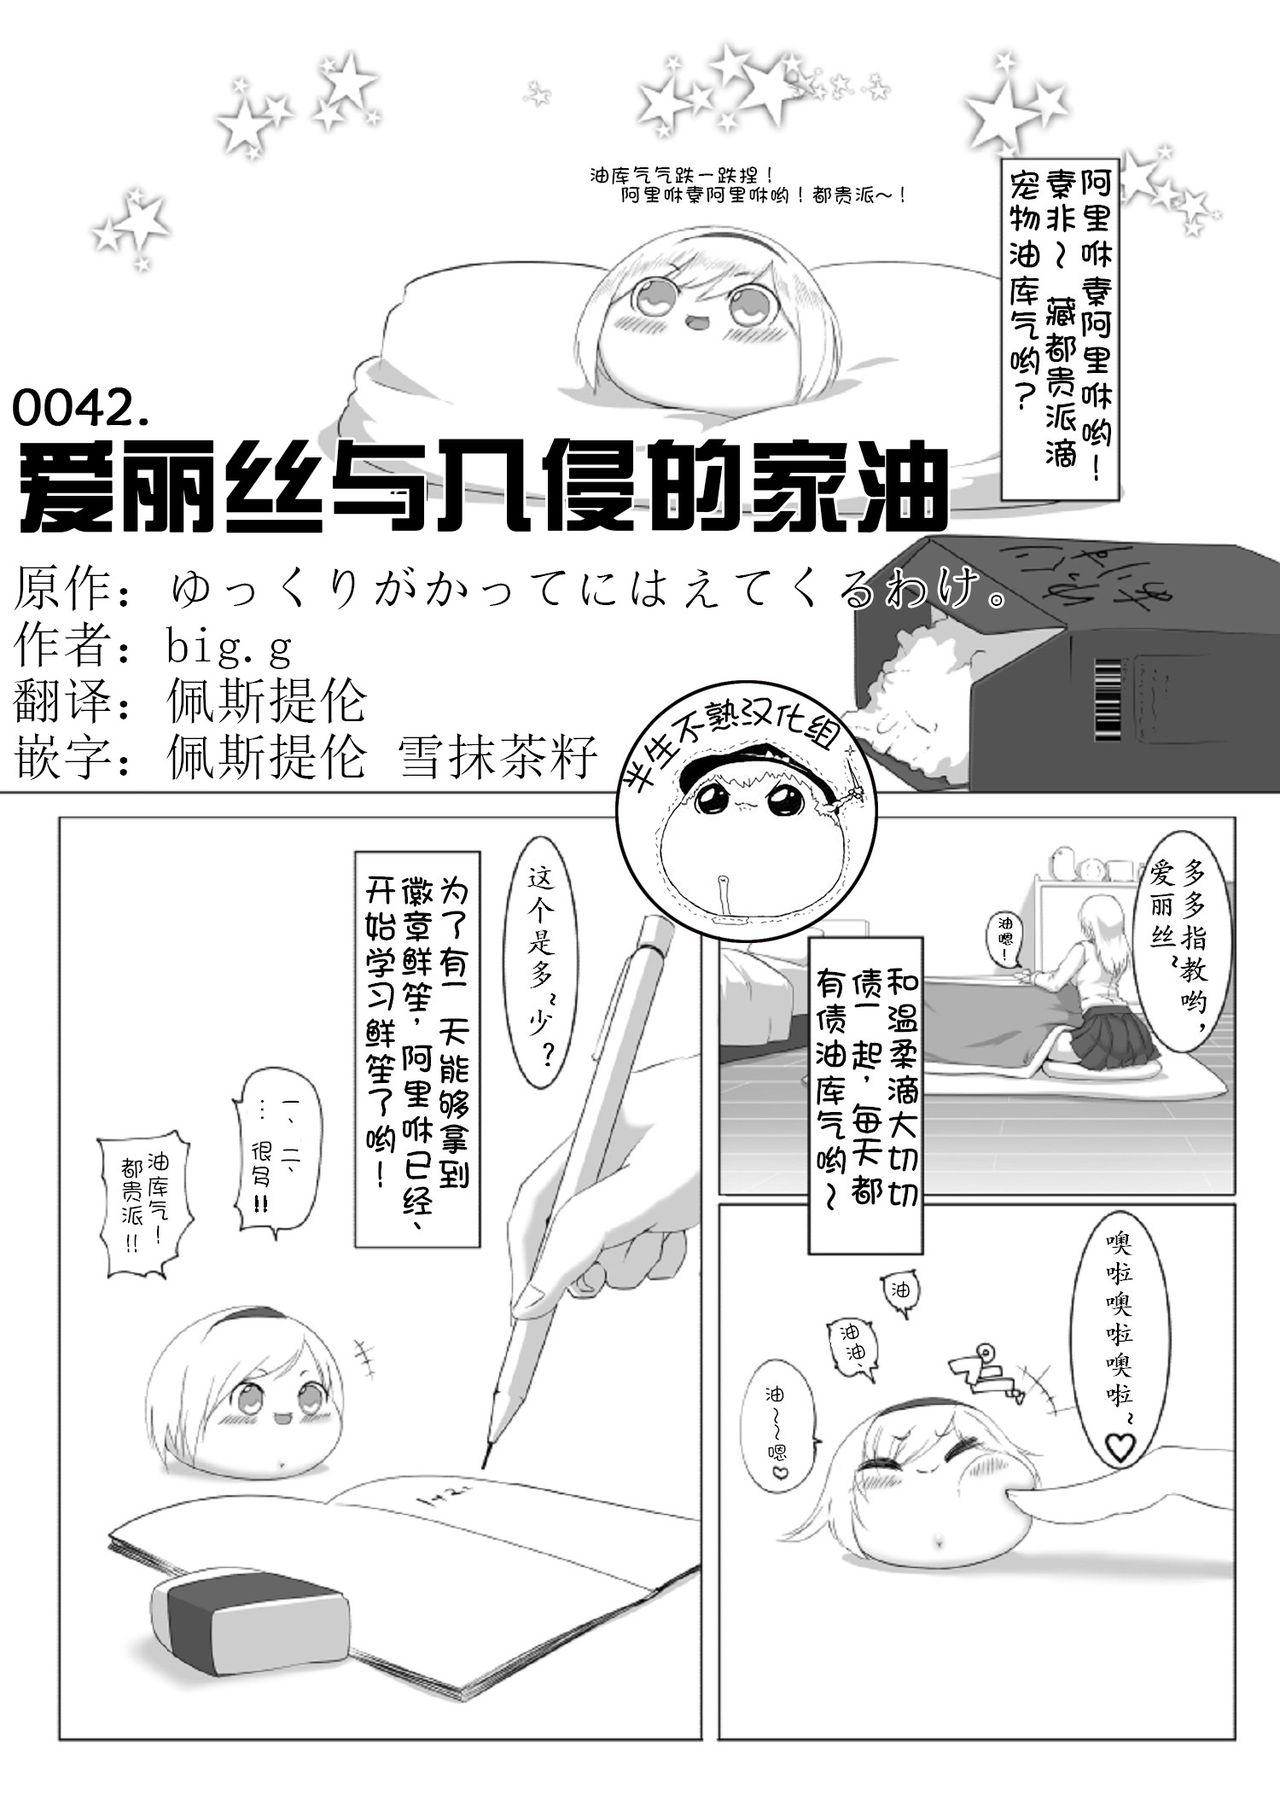 Nipple ゆっくりがかってにはえてくるわけ（Chinese) - Touhou project Cheating Wife - Page 1